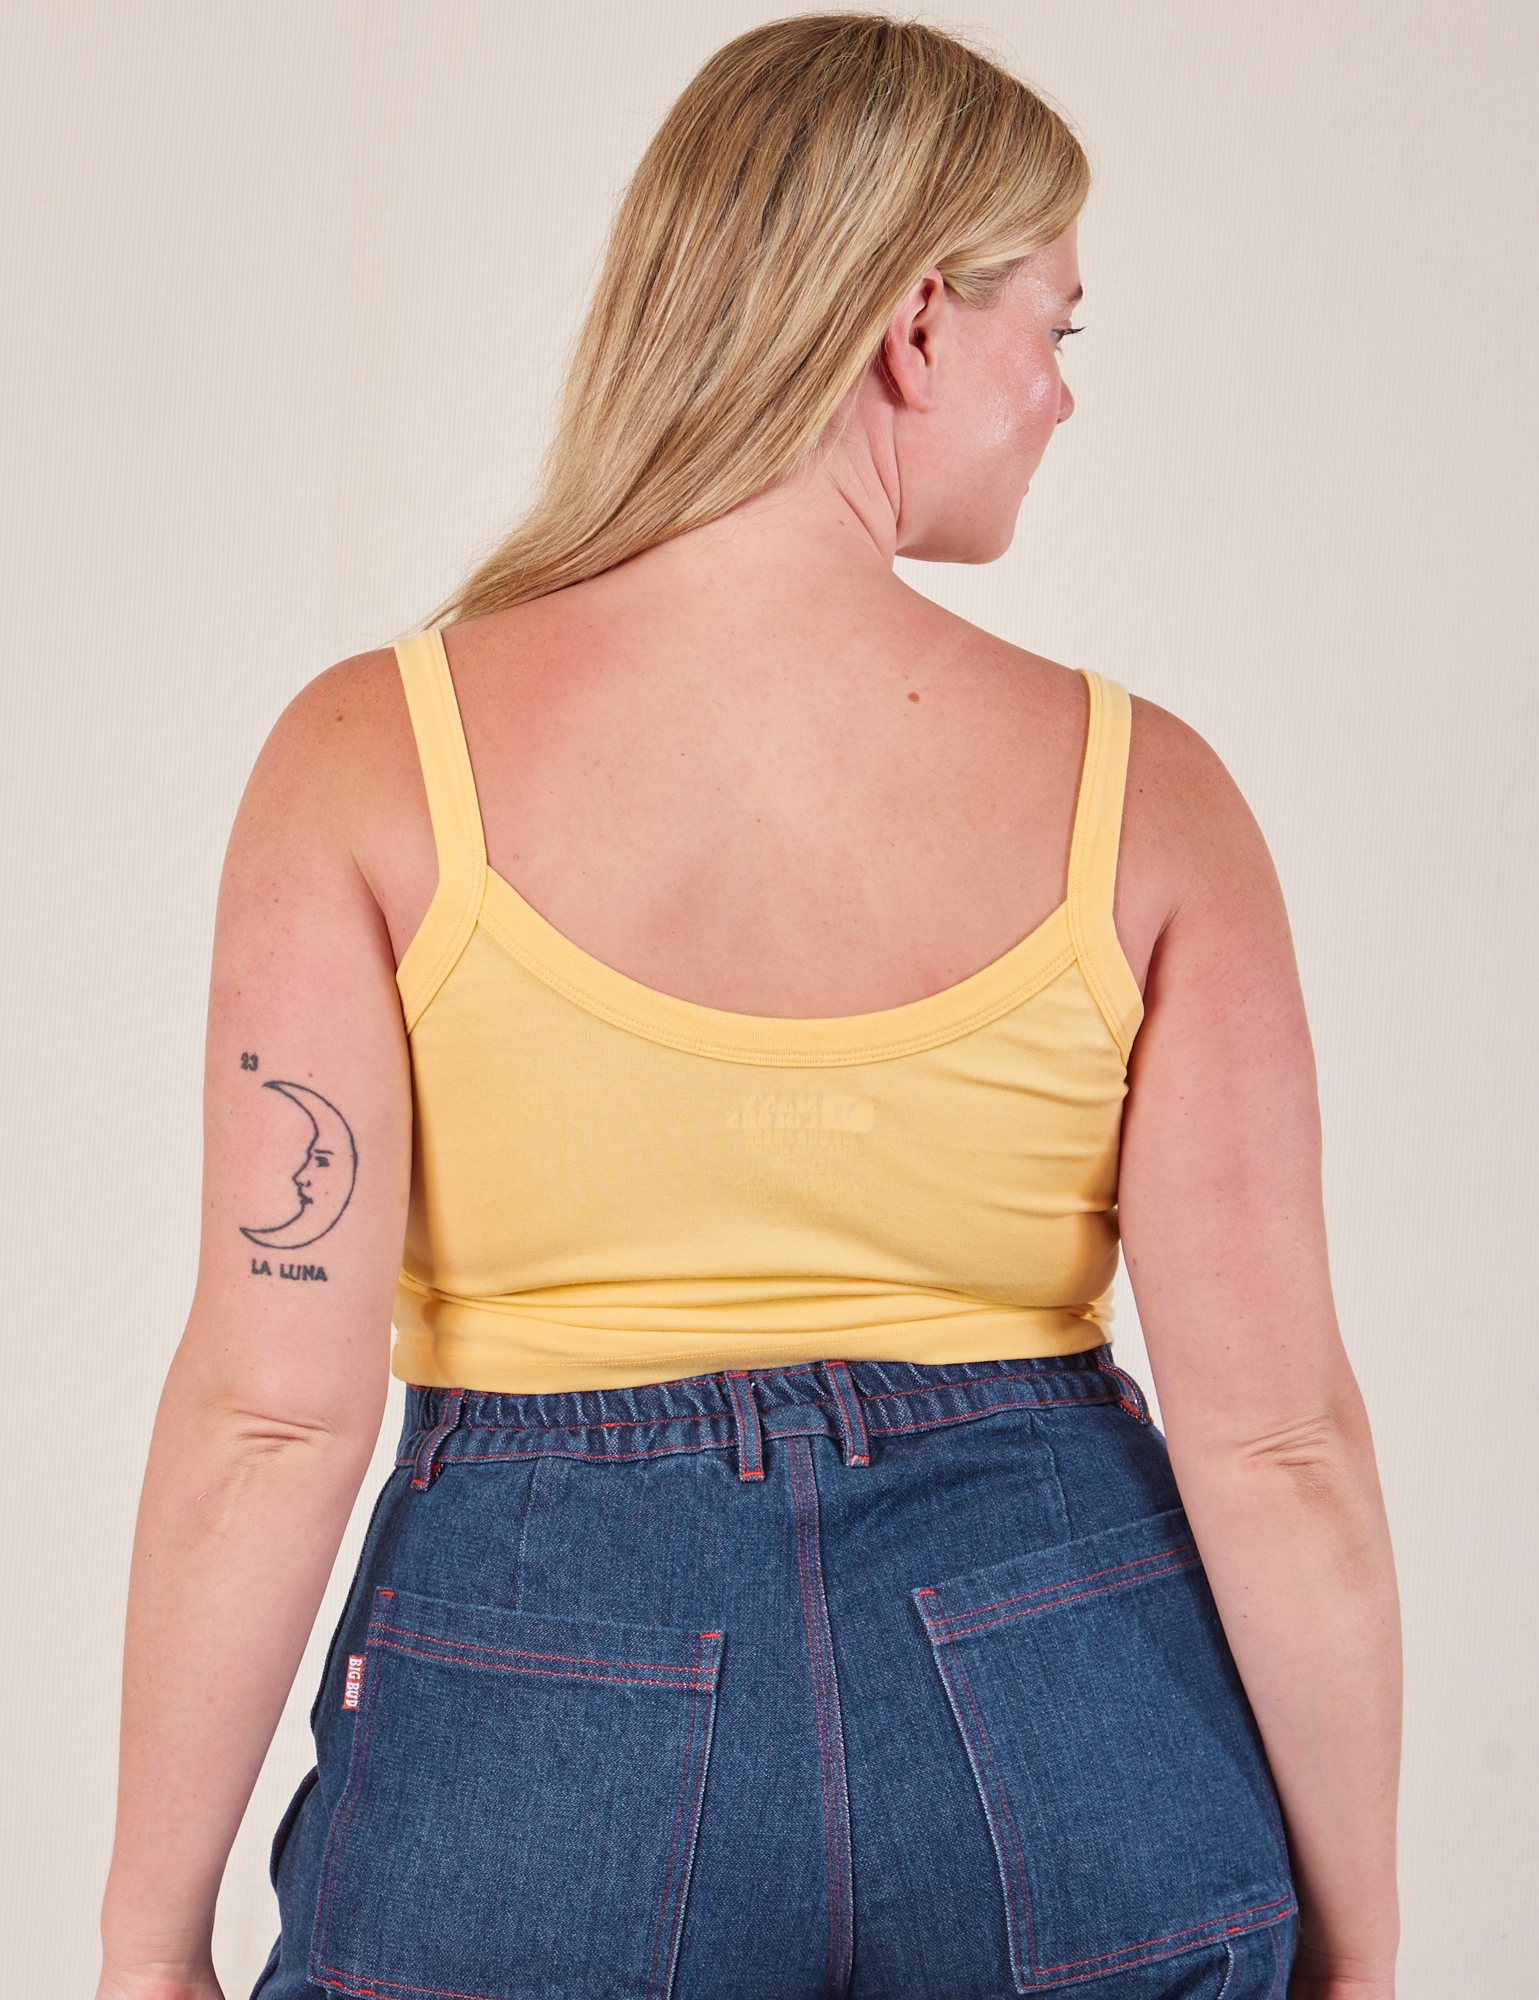 Cropped Cami in Butter Yellow back view on Lish